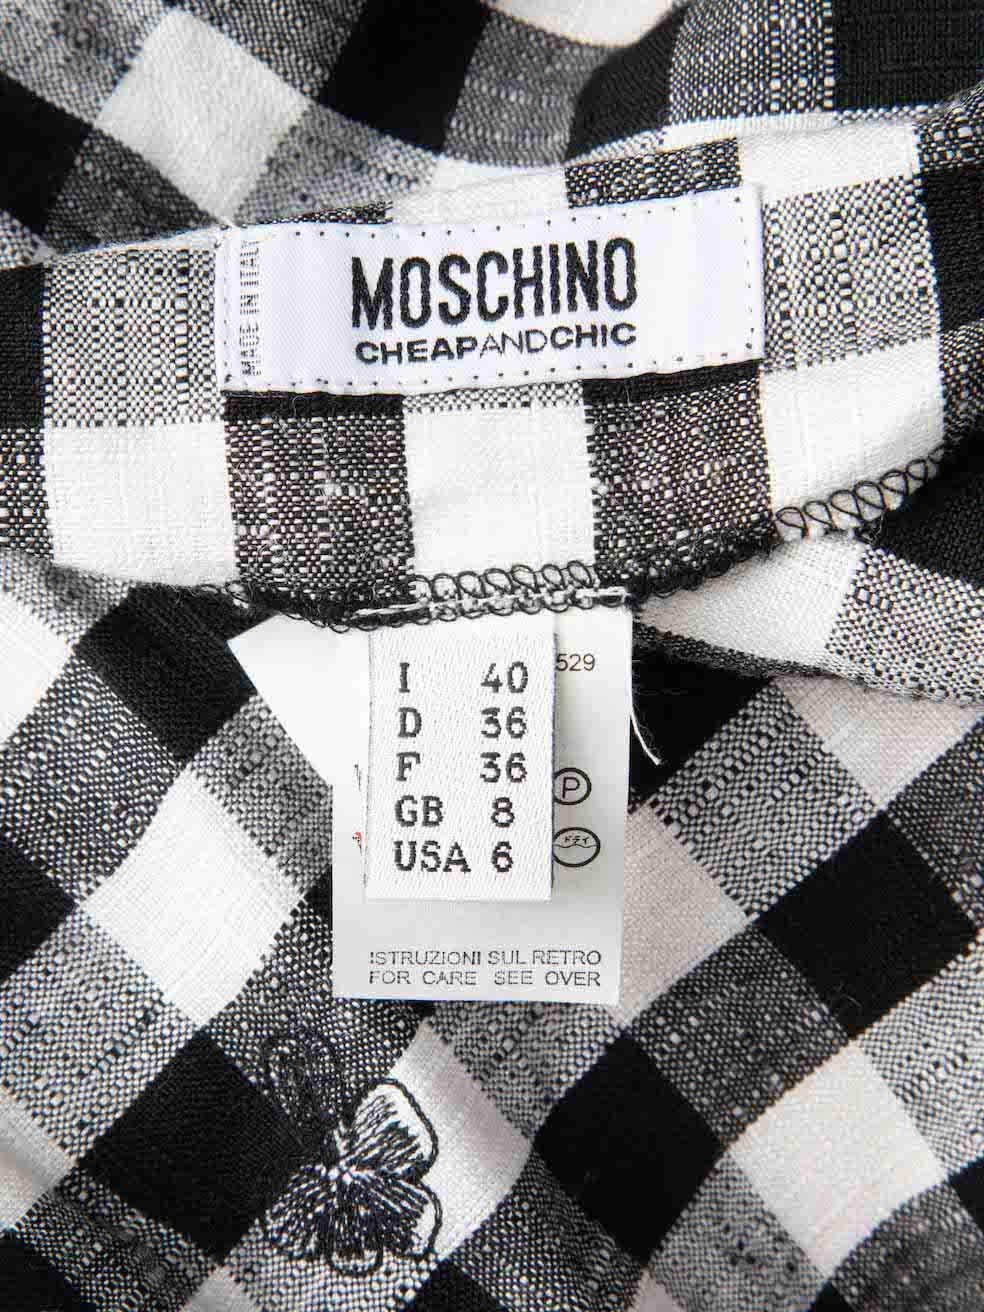 Moschino Moschino Cheap And Chic Black Gingham Floral Top & Skirt Set Size S 4